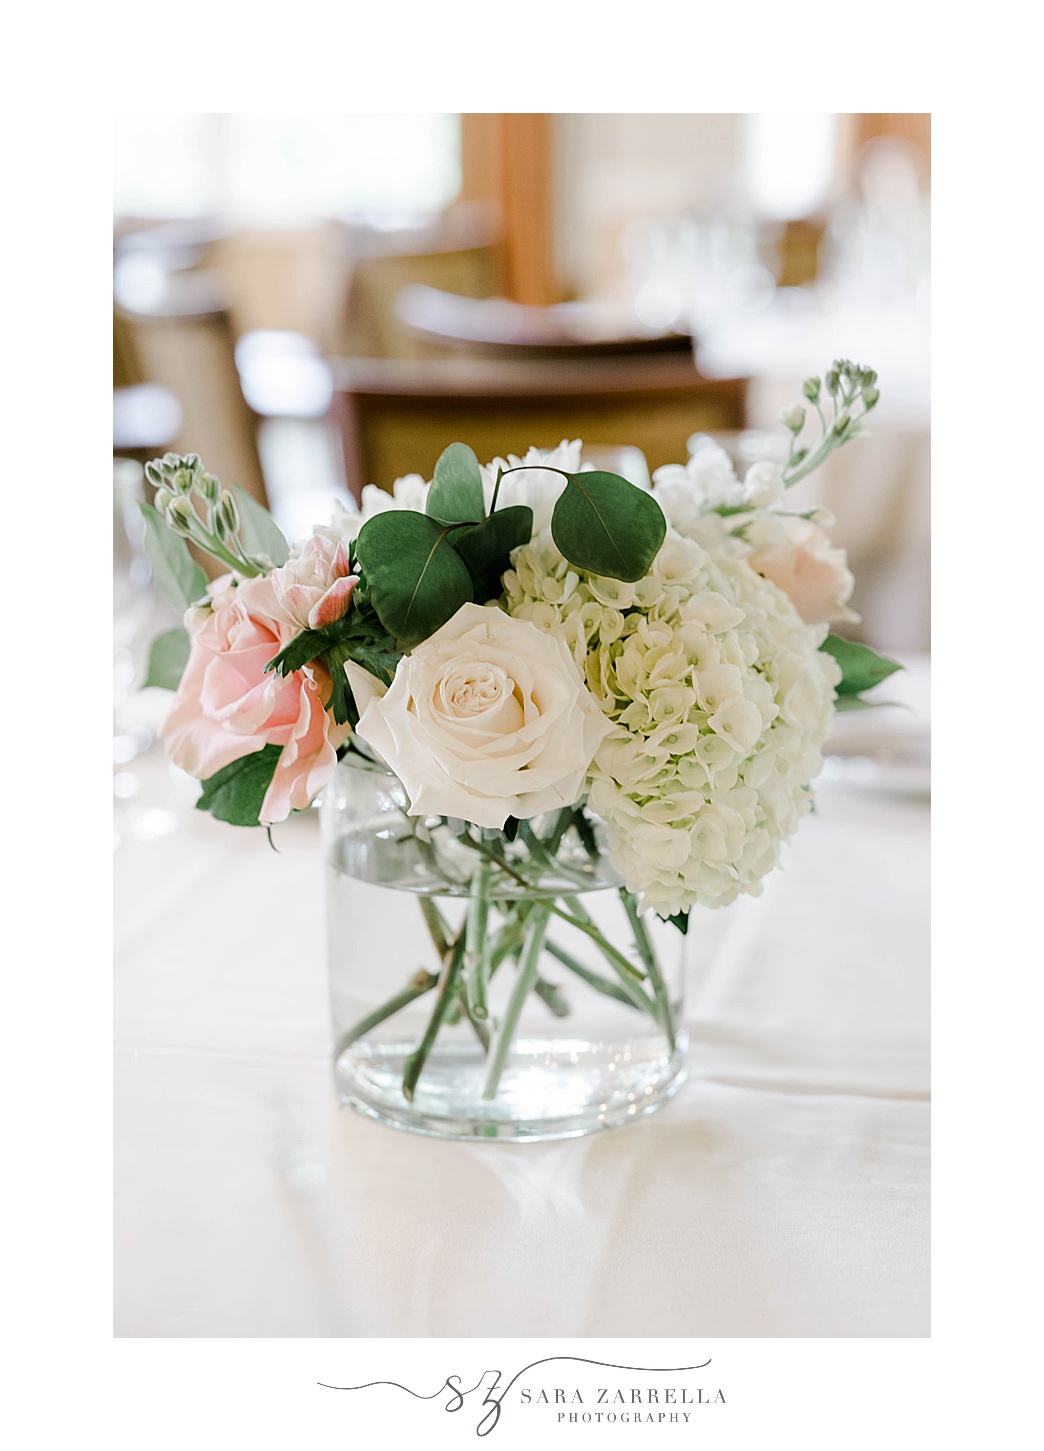 wedding reception centerpieces with white and pink flowers 